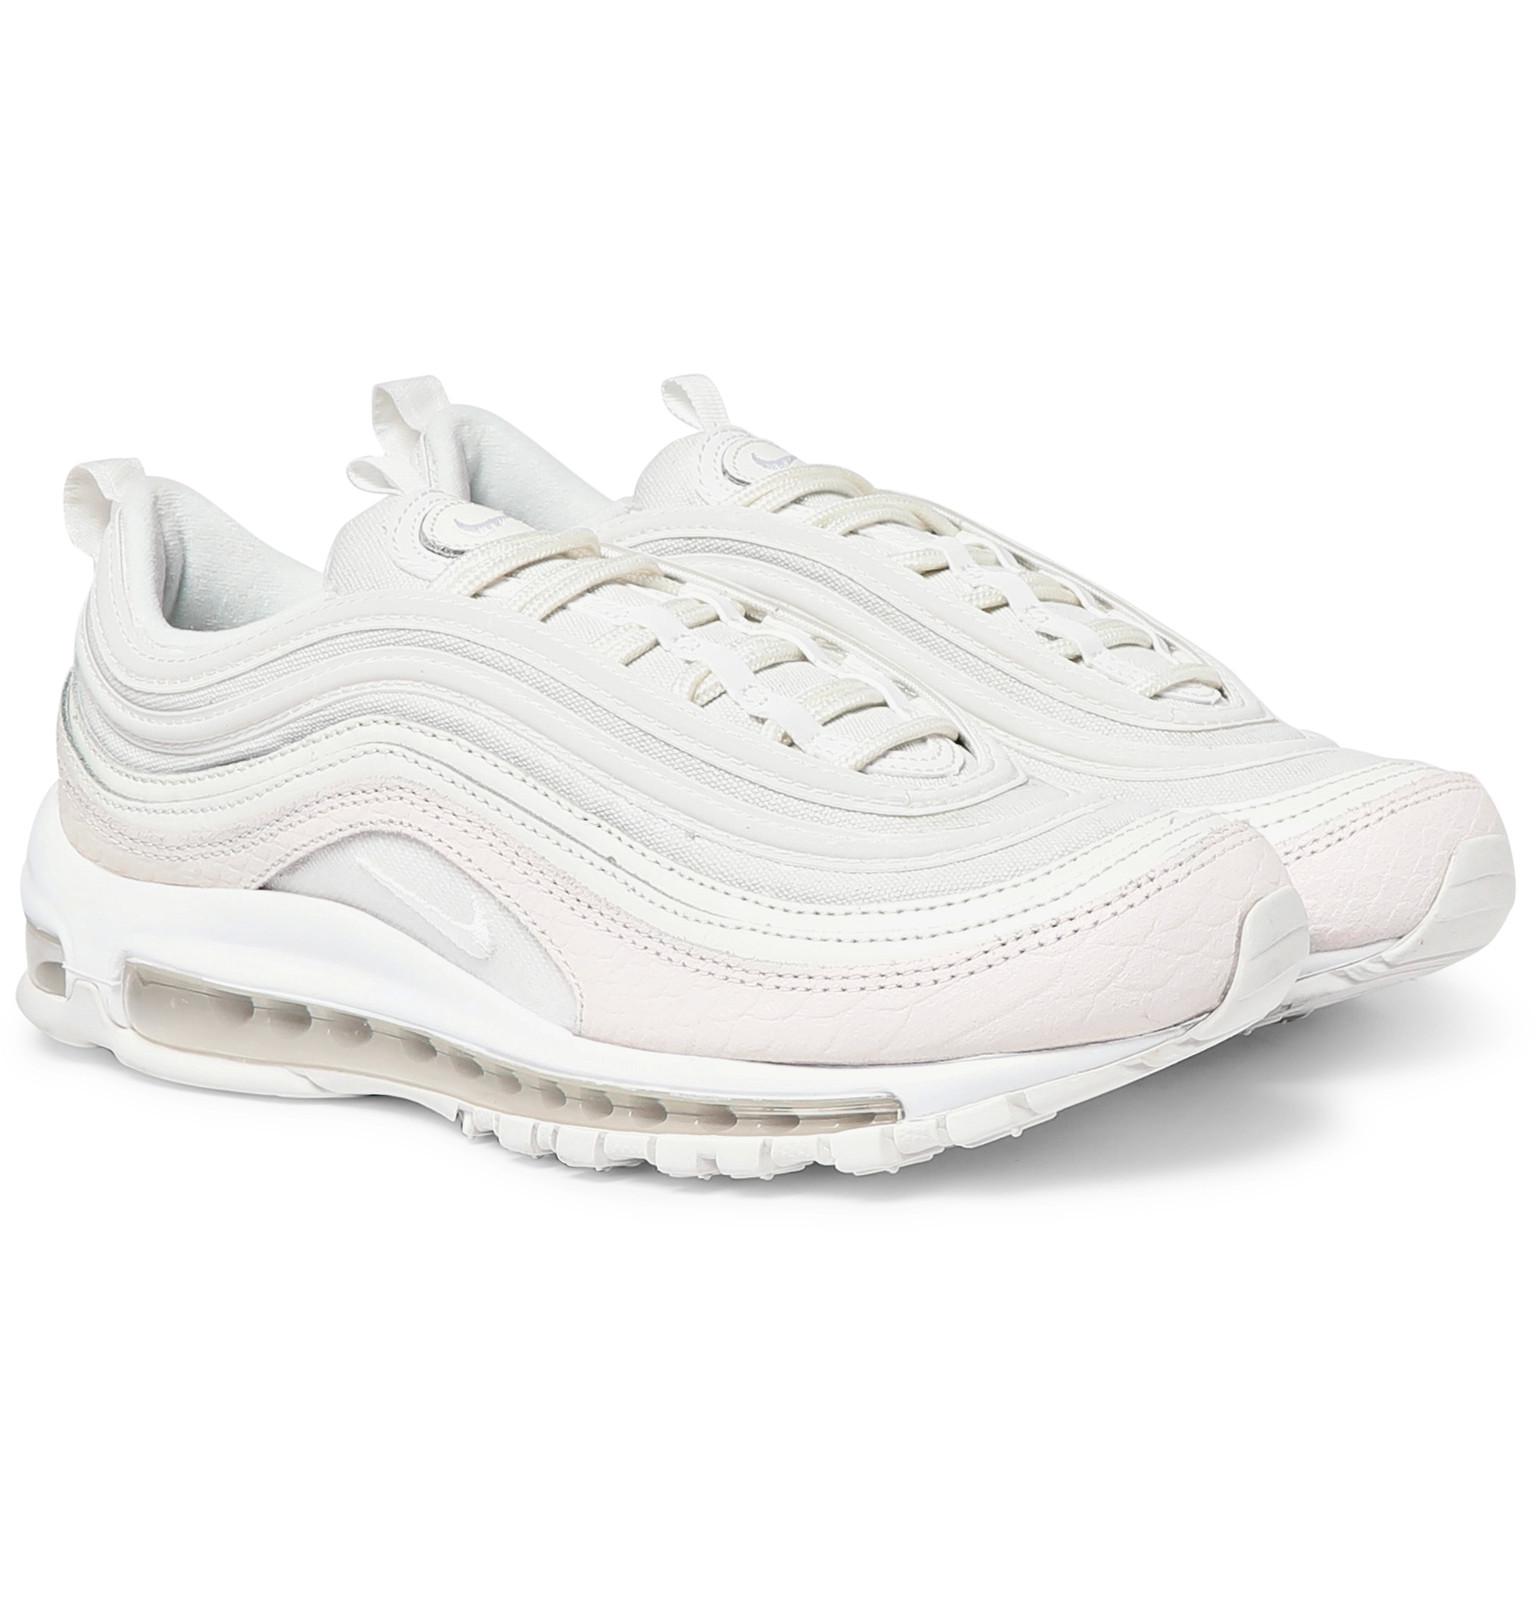 Nike Air Max 97 Suede, Leather And Mesh Sneakers in White for Men - Lyst